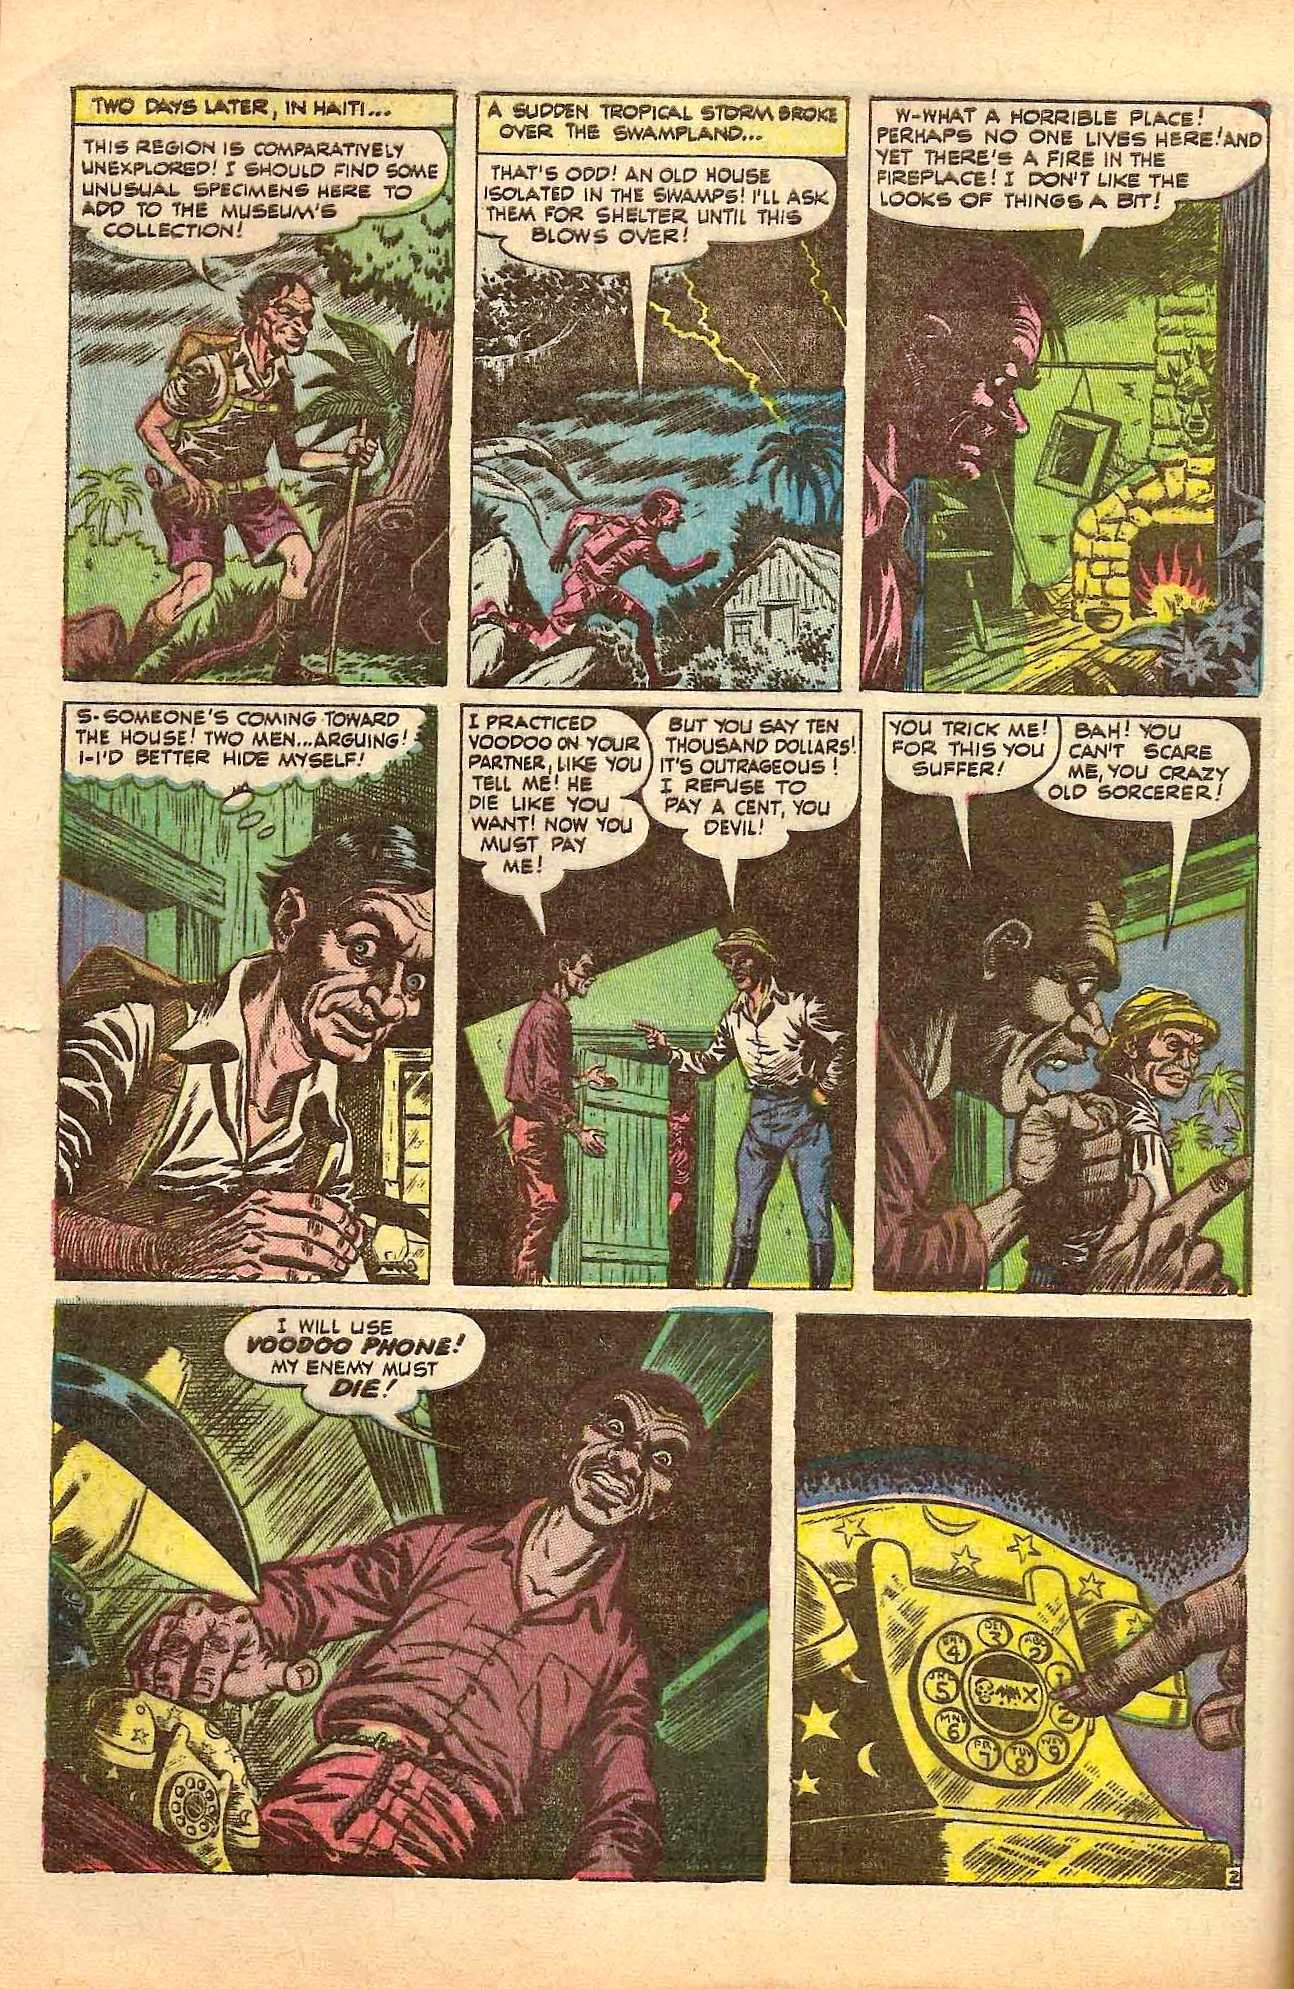 Marvel Tales (1949) 114 Page 2